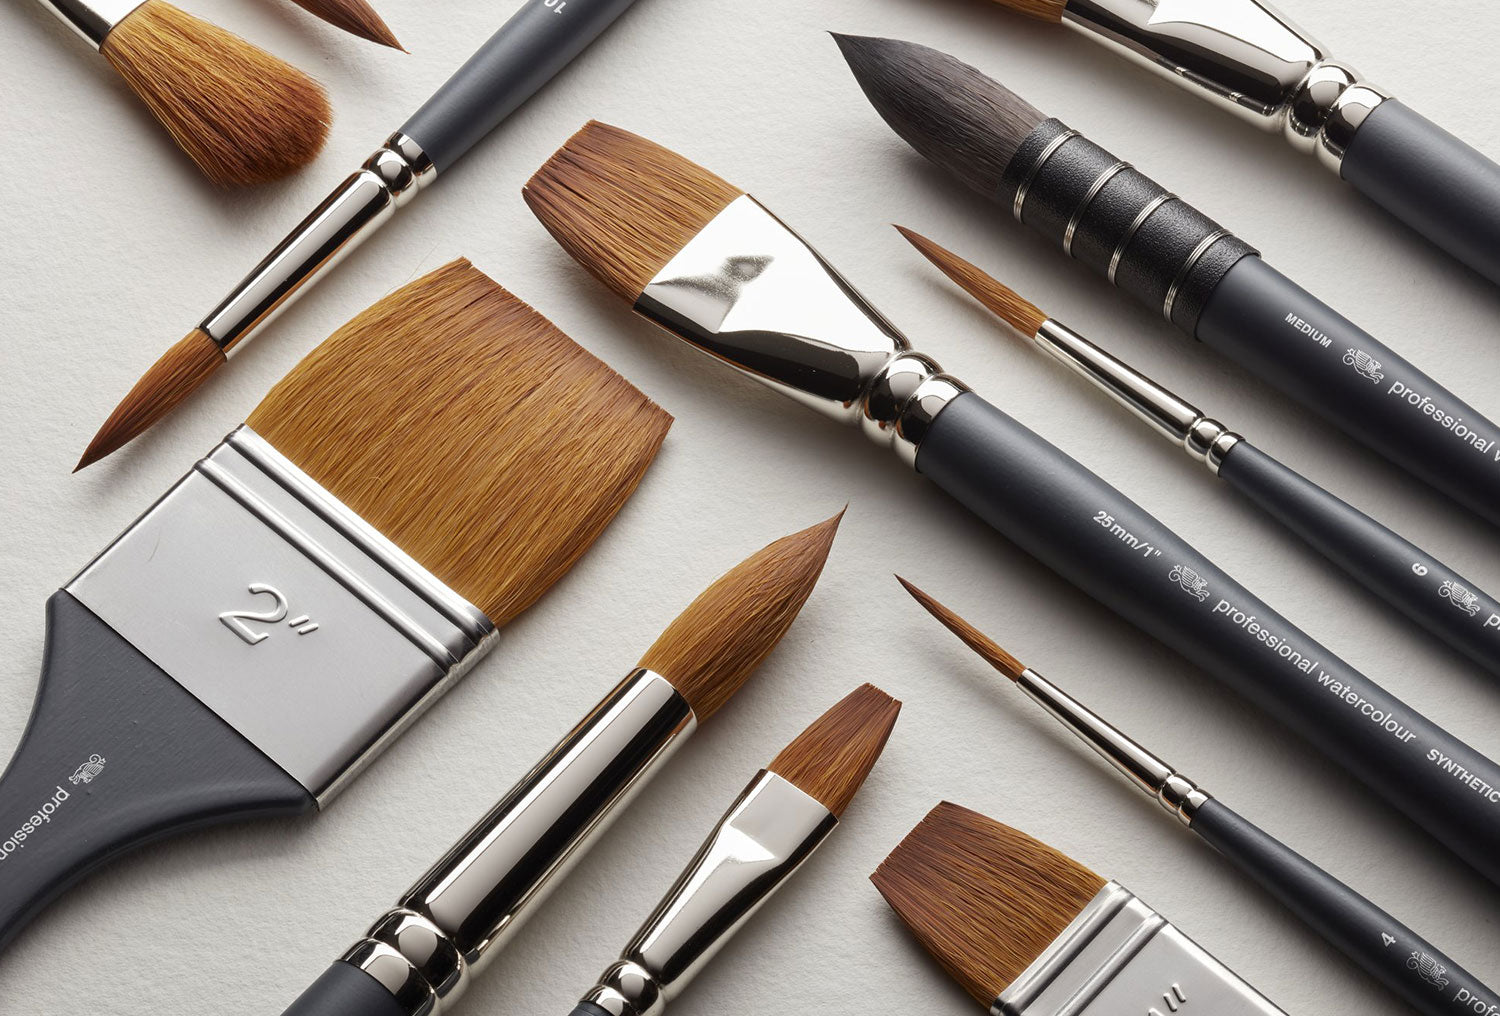 Introducing the Winsor & Newton professional watercolour synthetic sable brushes